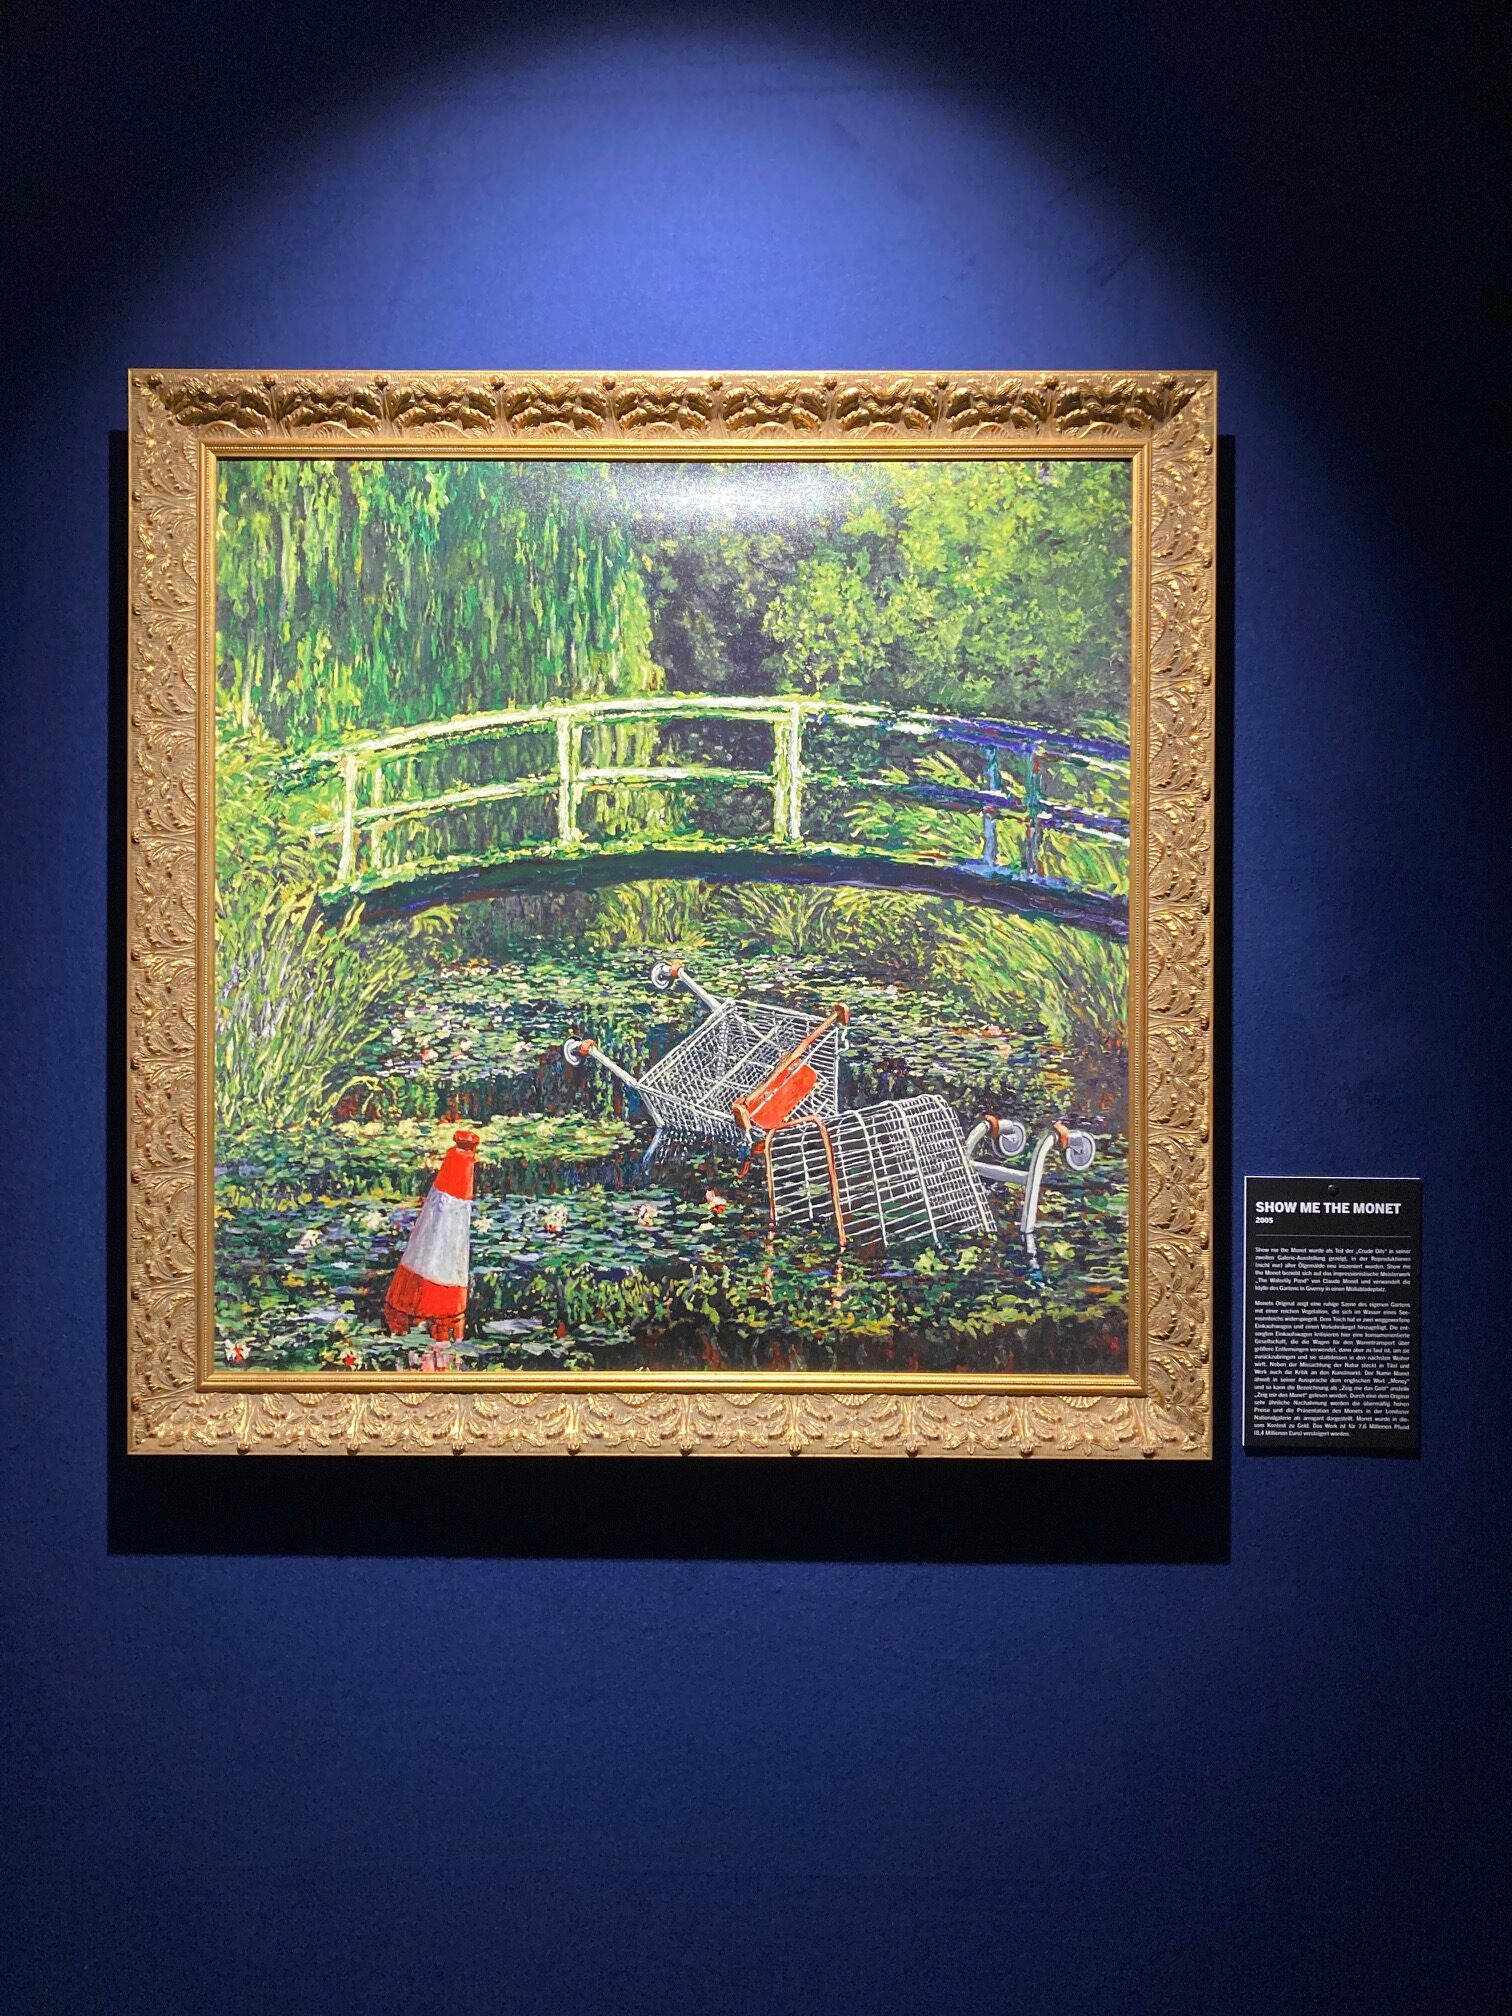 Banksy and Monet